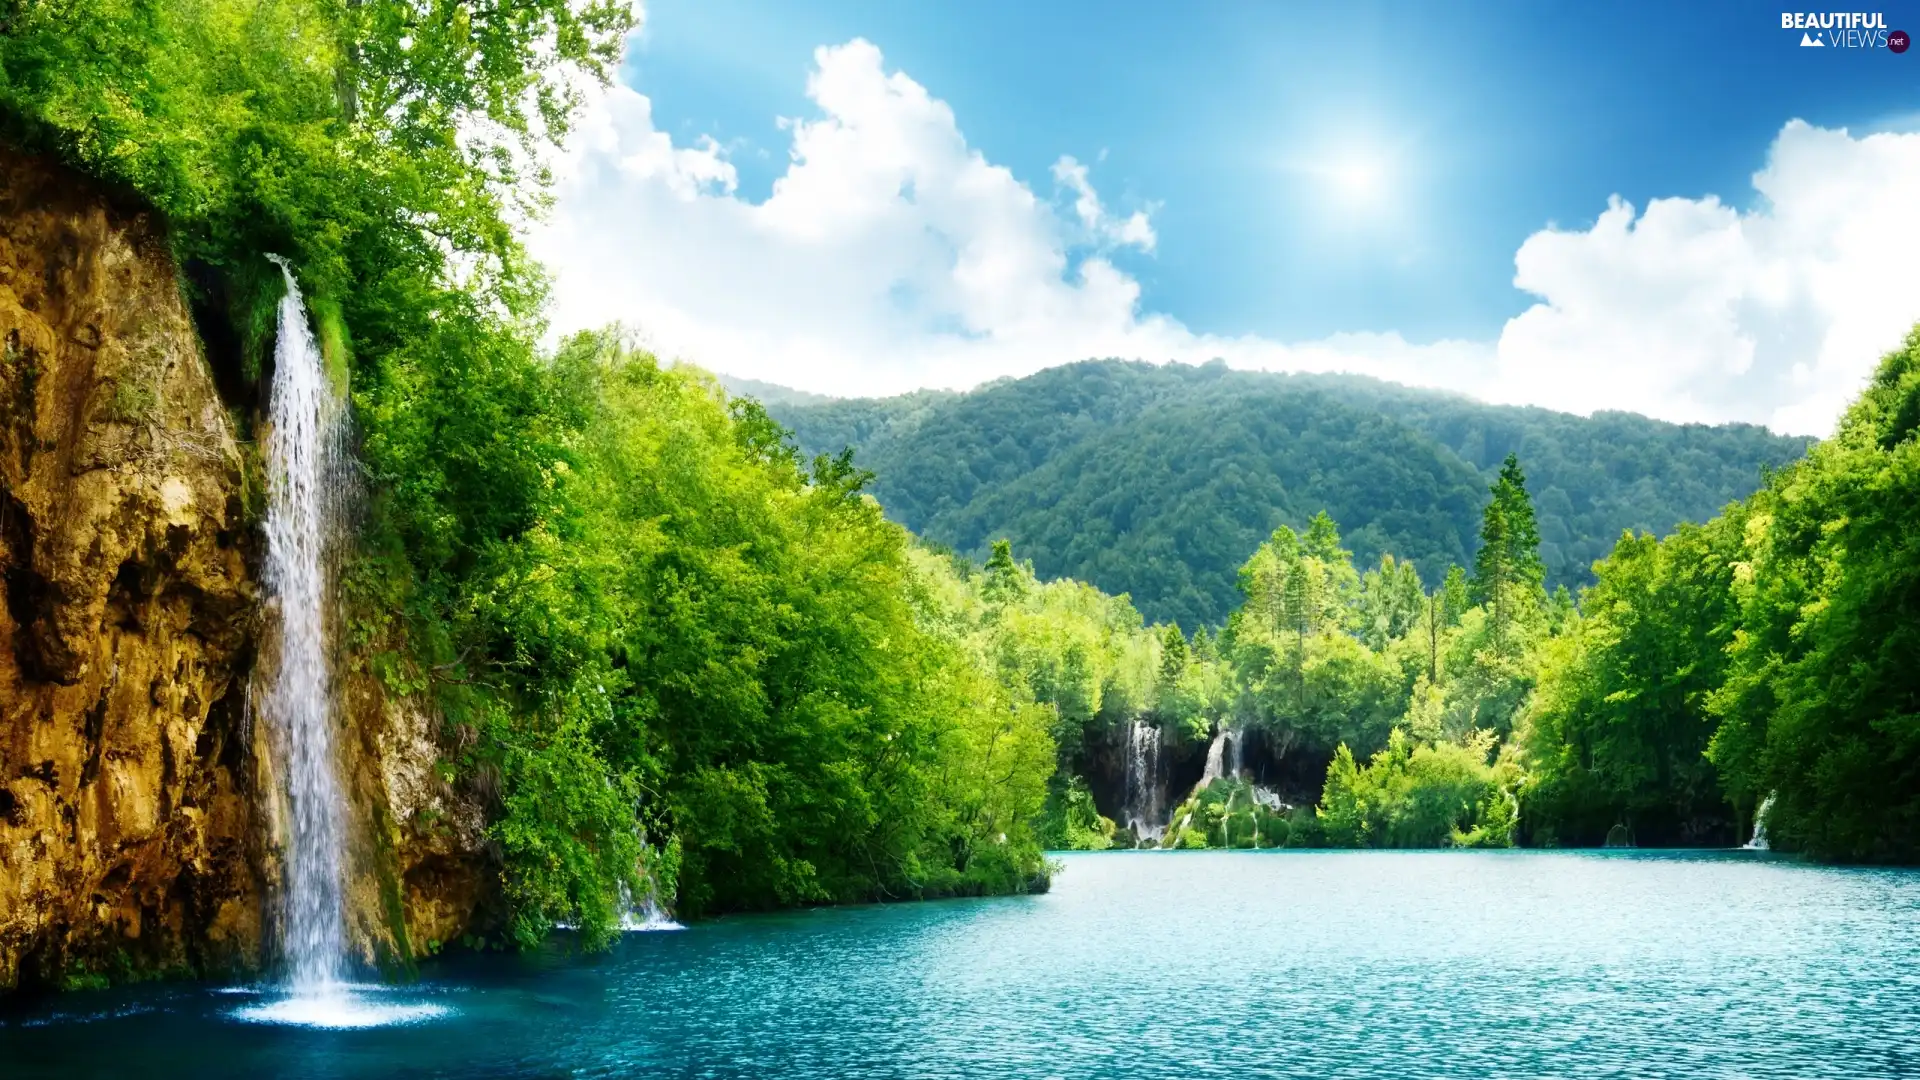 Sky, water, forest